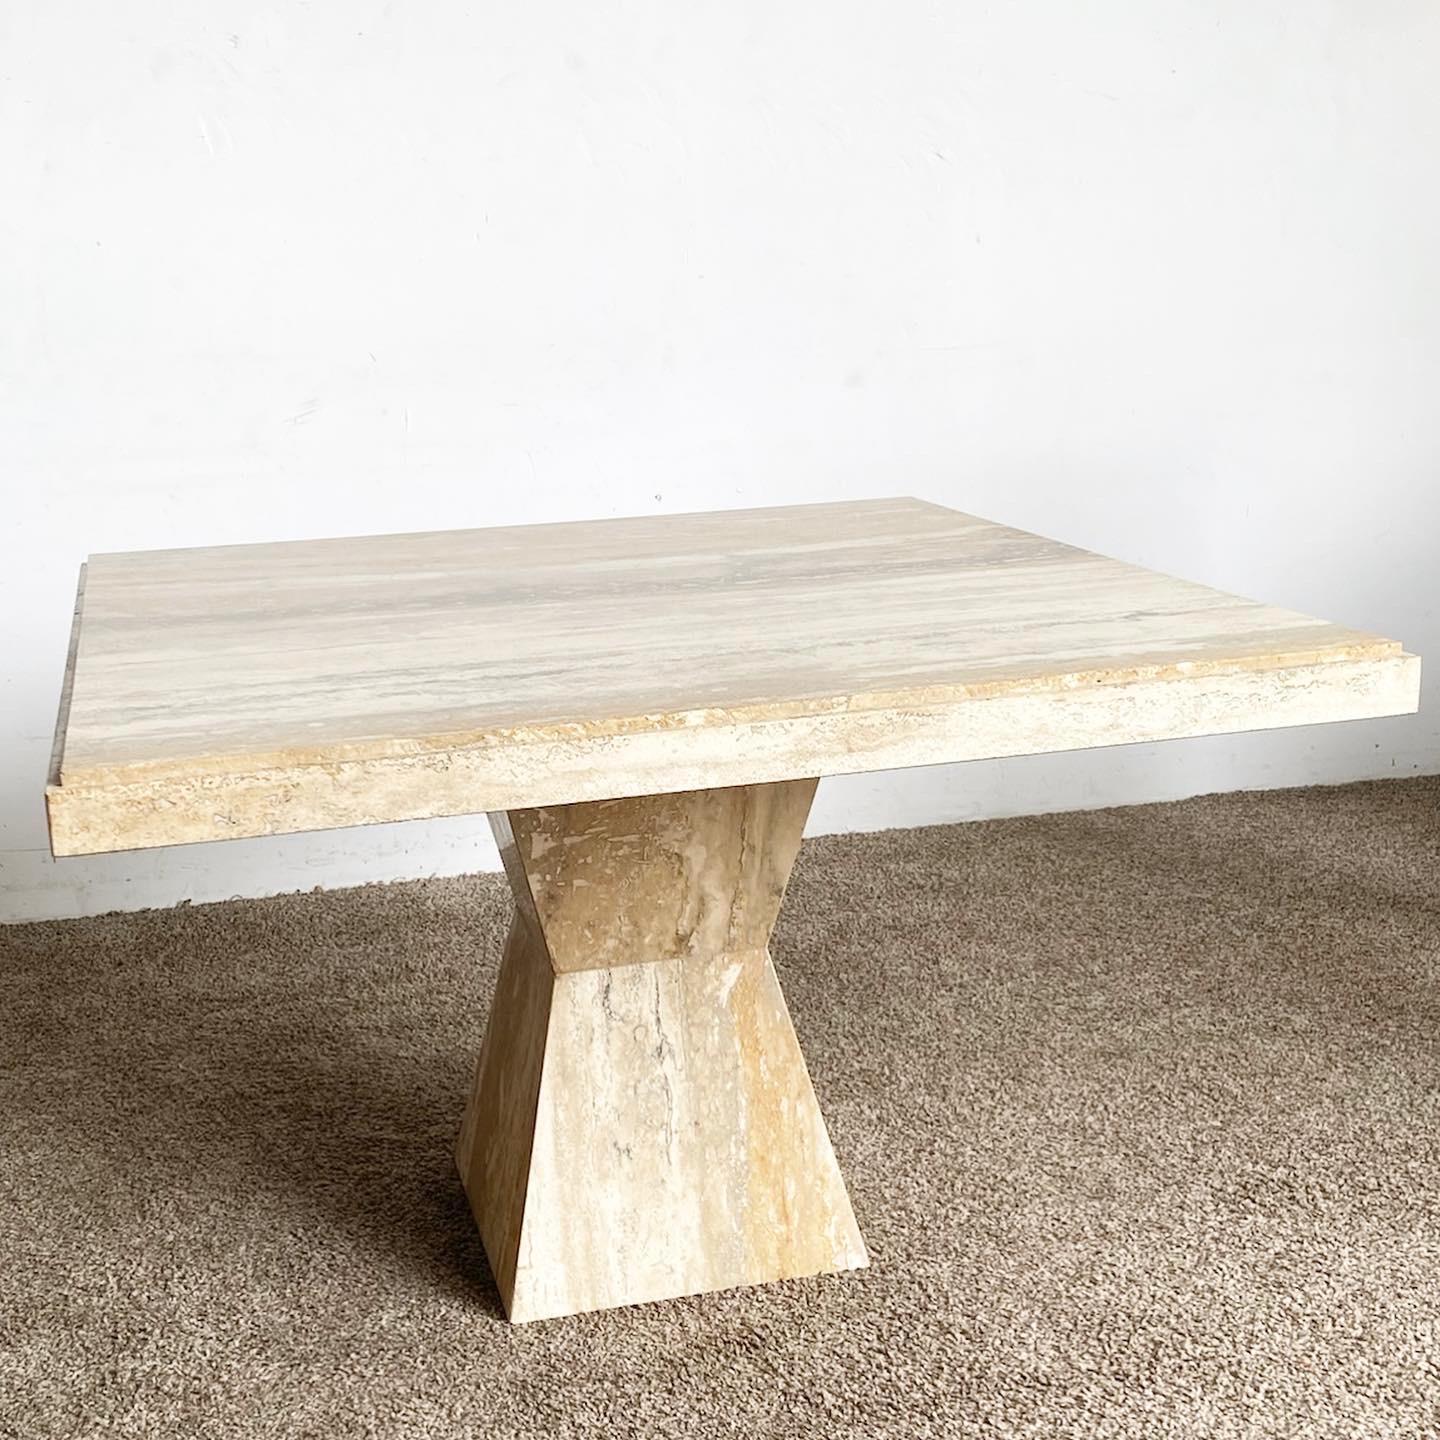 Italian Dark Travertine State Top Dining Table With Sculpted Pedestal Base 2